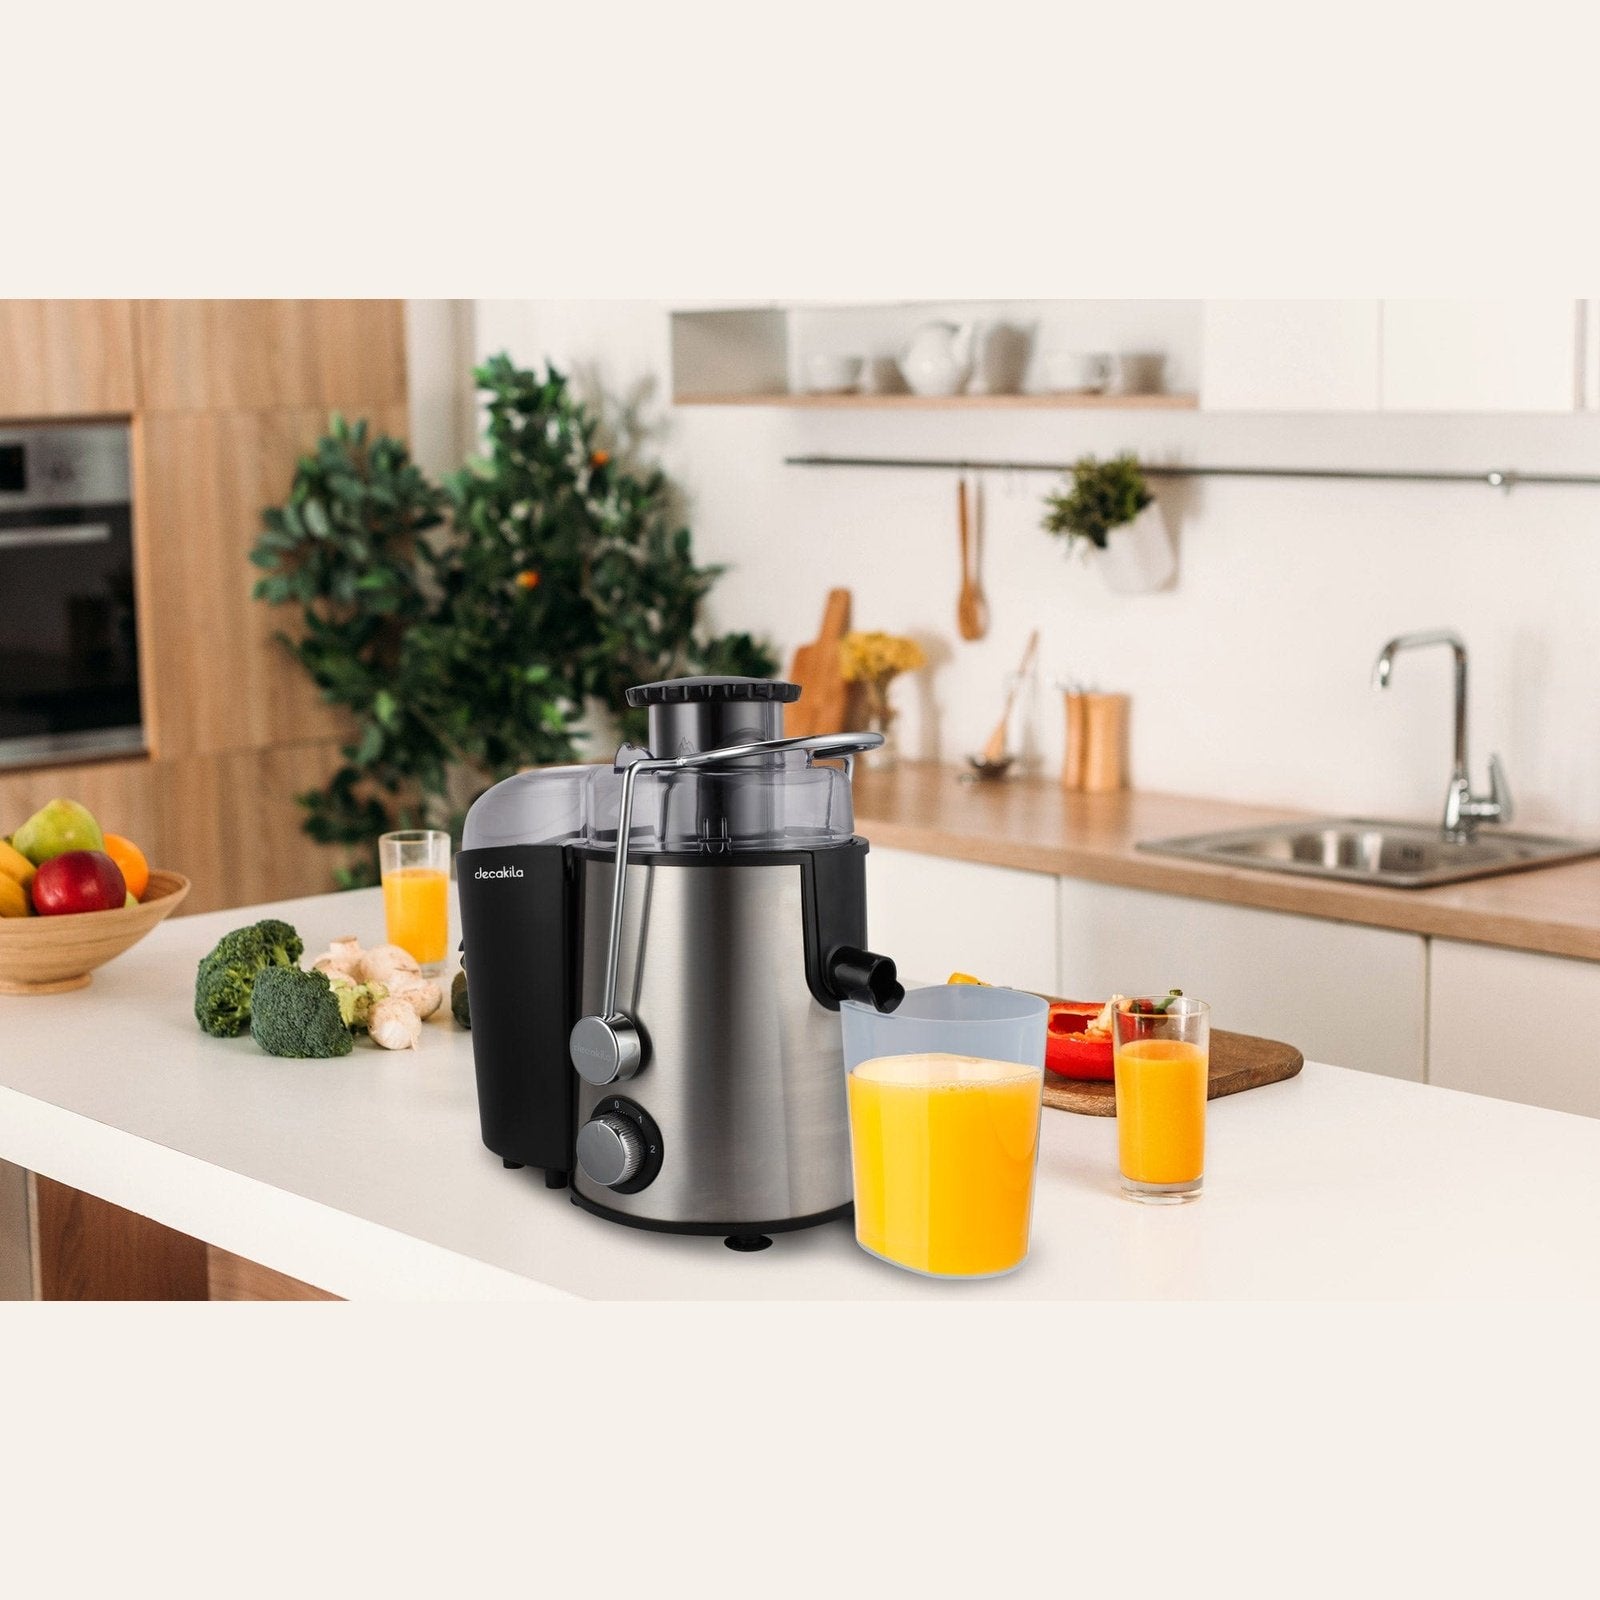 Buy Decakila Citrus Juicer with Double Cones 30W - KEJC001W in Ghana